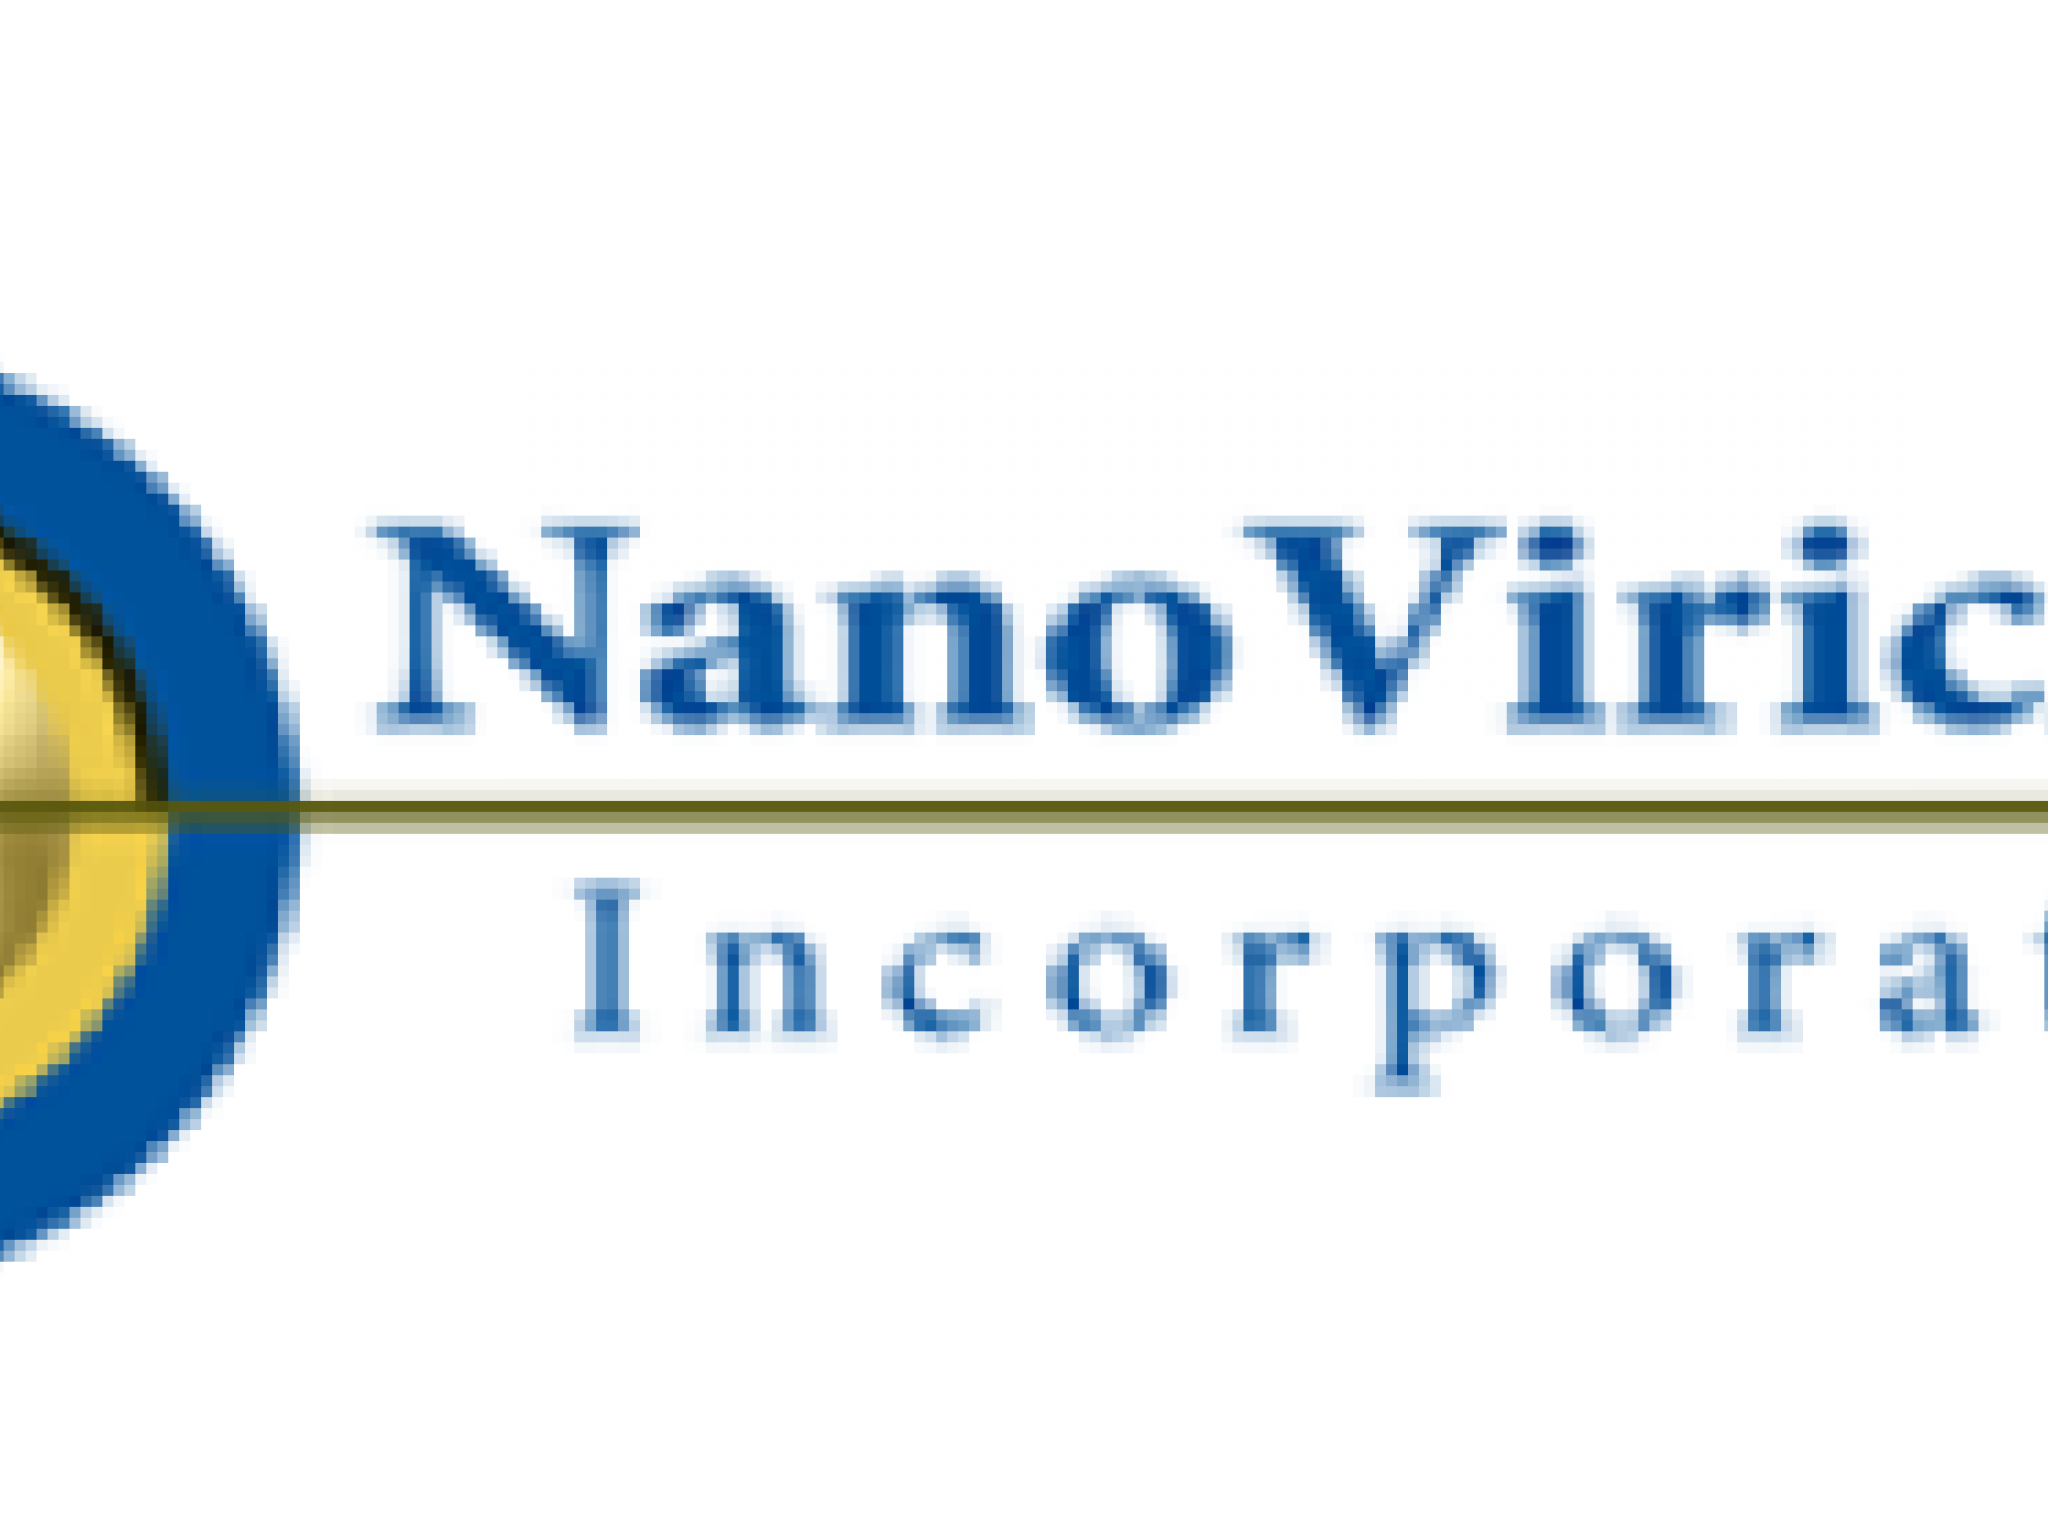  why-nanoviricides-jumped-over-48-here-are-106-biggest-movers-from-yesterday 